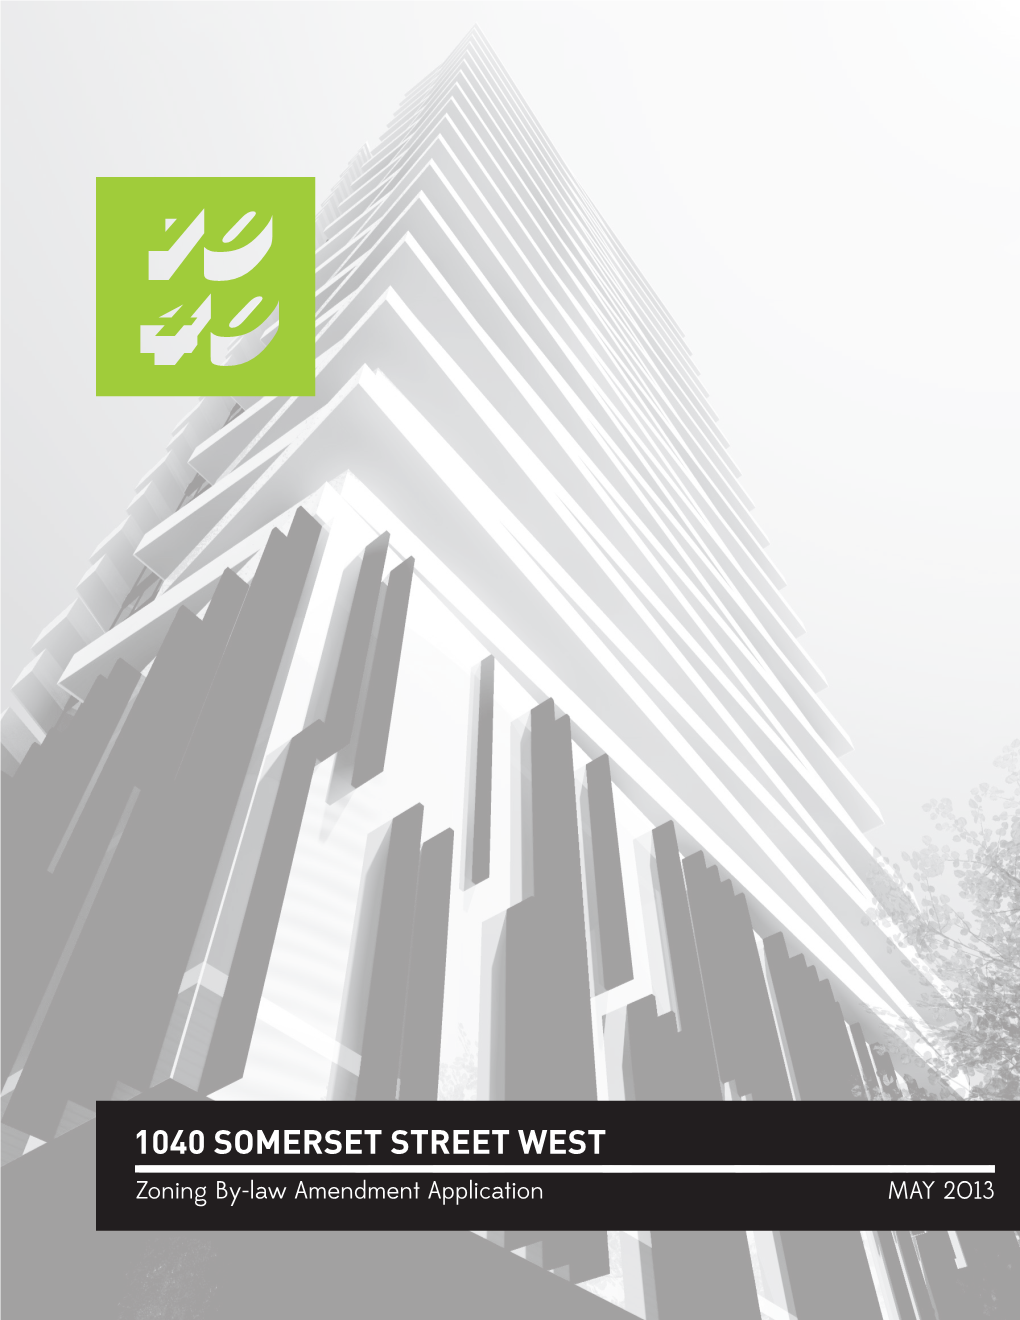 1040 SOMERSET STREET WEST Zoning By-Law Amendment Application MAY 2013 1040 1040 1040 10 1040 1040 1040 40 10 1040 10 10 40 40 40